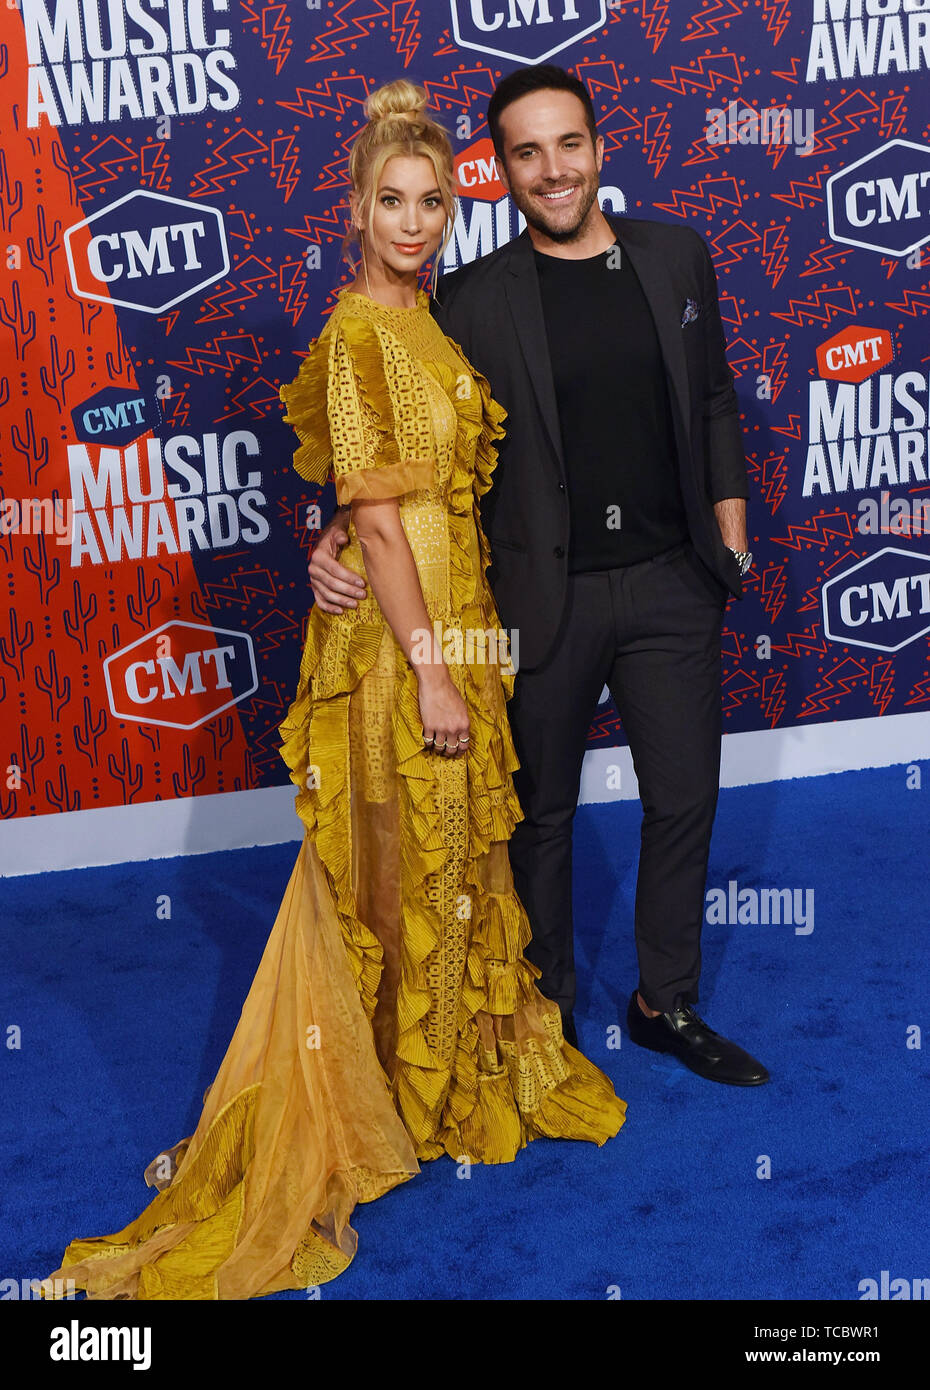 NASHVILLE, TENNESSEE - JUNE 05: Tyler Rich, Sabina Gadecki attend the 2019 CMT Music Awards at Bridgestone Arena on June 05, 2019 in Nashville, Tennessee. Photo: Nathan Cox for imageSPACE/MediaPunch Stock Photo